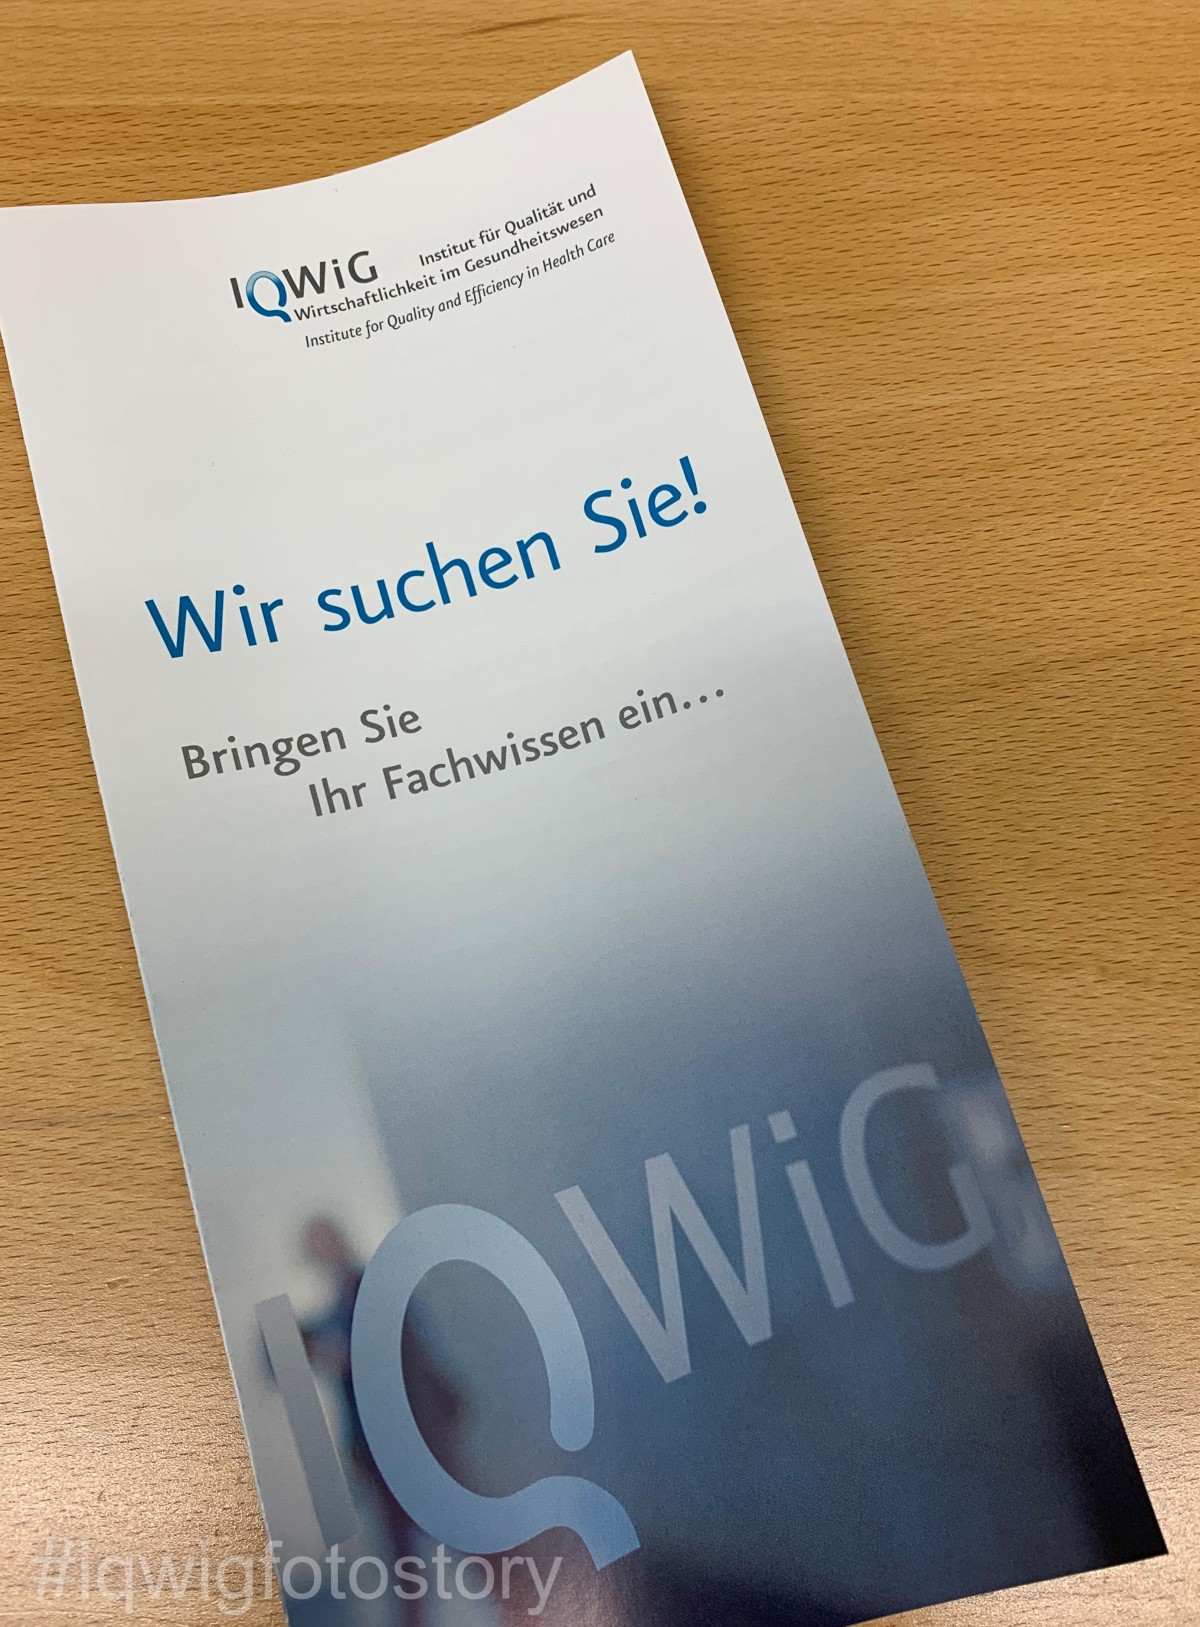 An IQWiG flyer is on a table. It is used to recruit external experts. On the front, it says in large letters, “We are looking for you!”